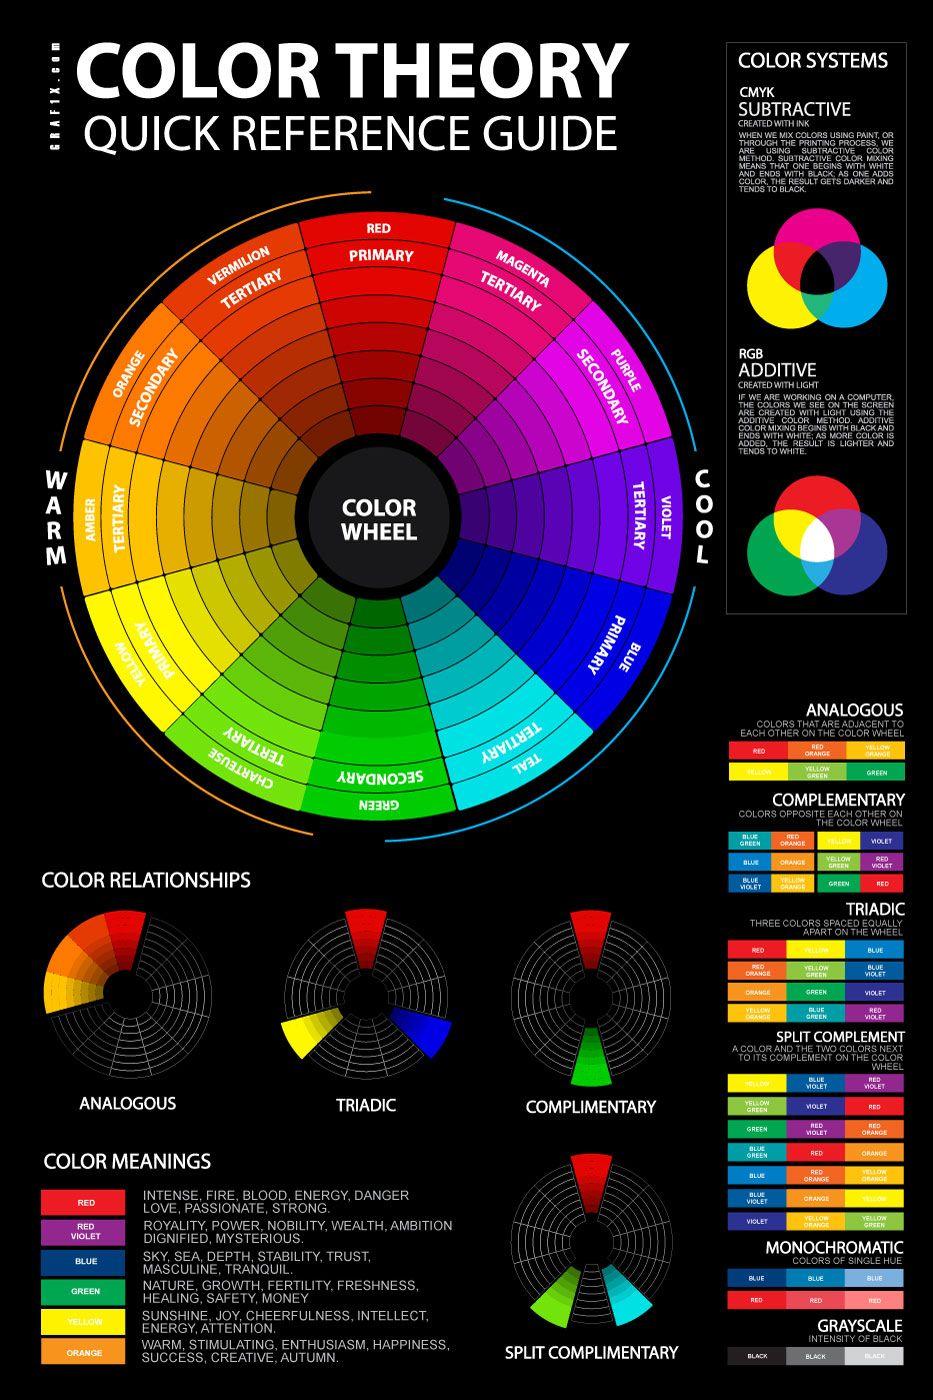 Blue Red Orange Round Logo - Color Meaning and Psychology of Red, Blue, Green, Yellow, Orange ...